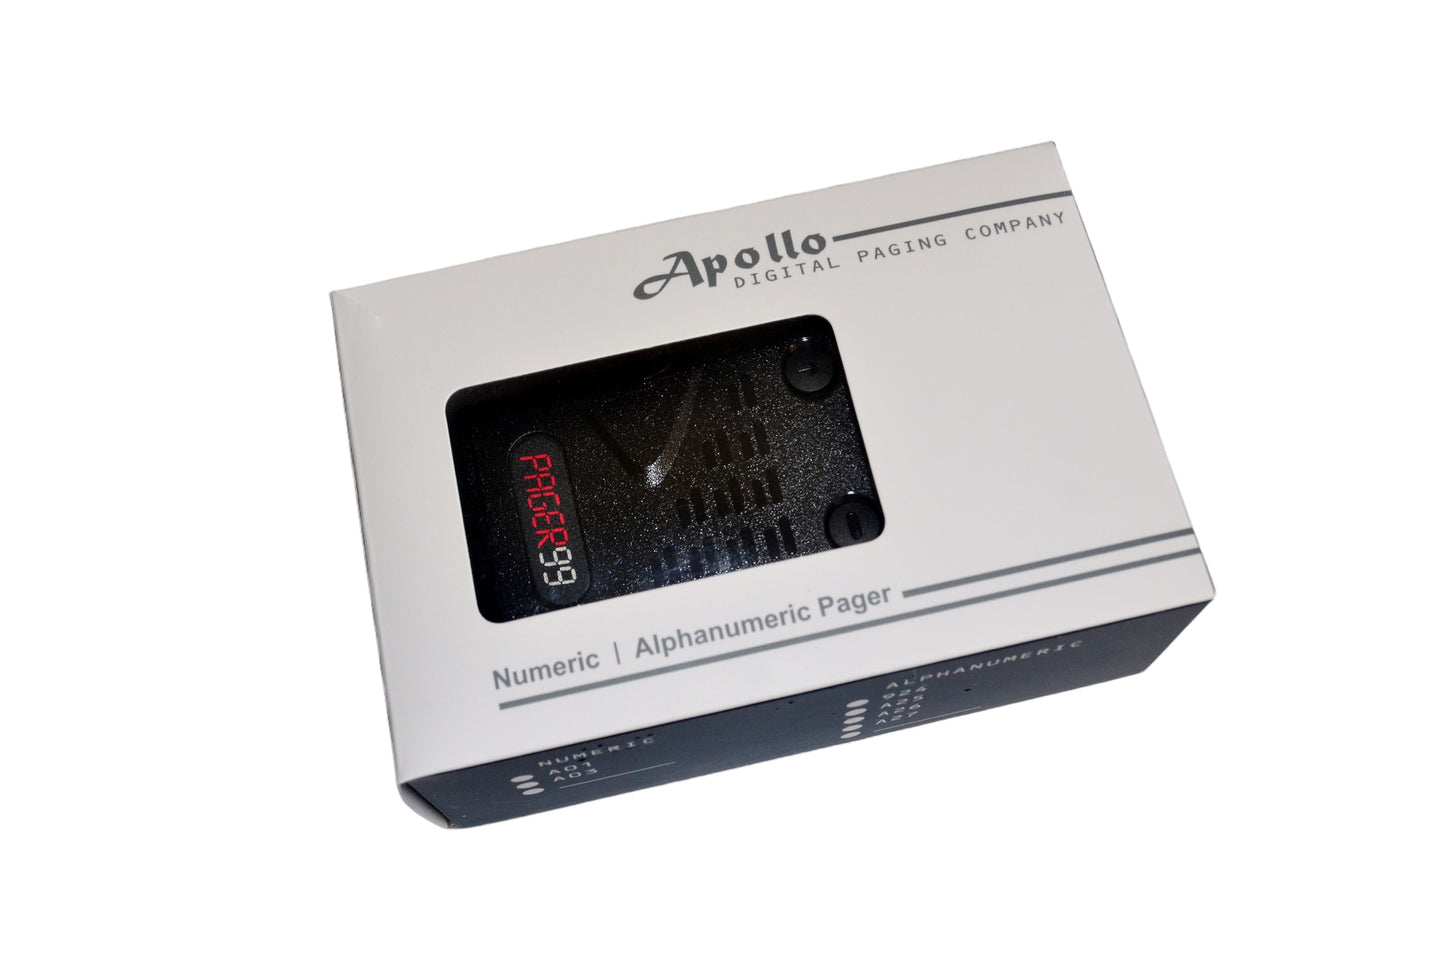 Apollo XL2000 1-Way Numeric Pager (Brand New) with 3-Month Prepaid Service